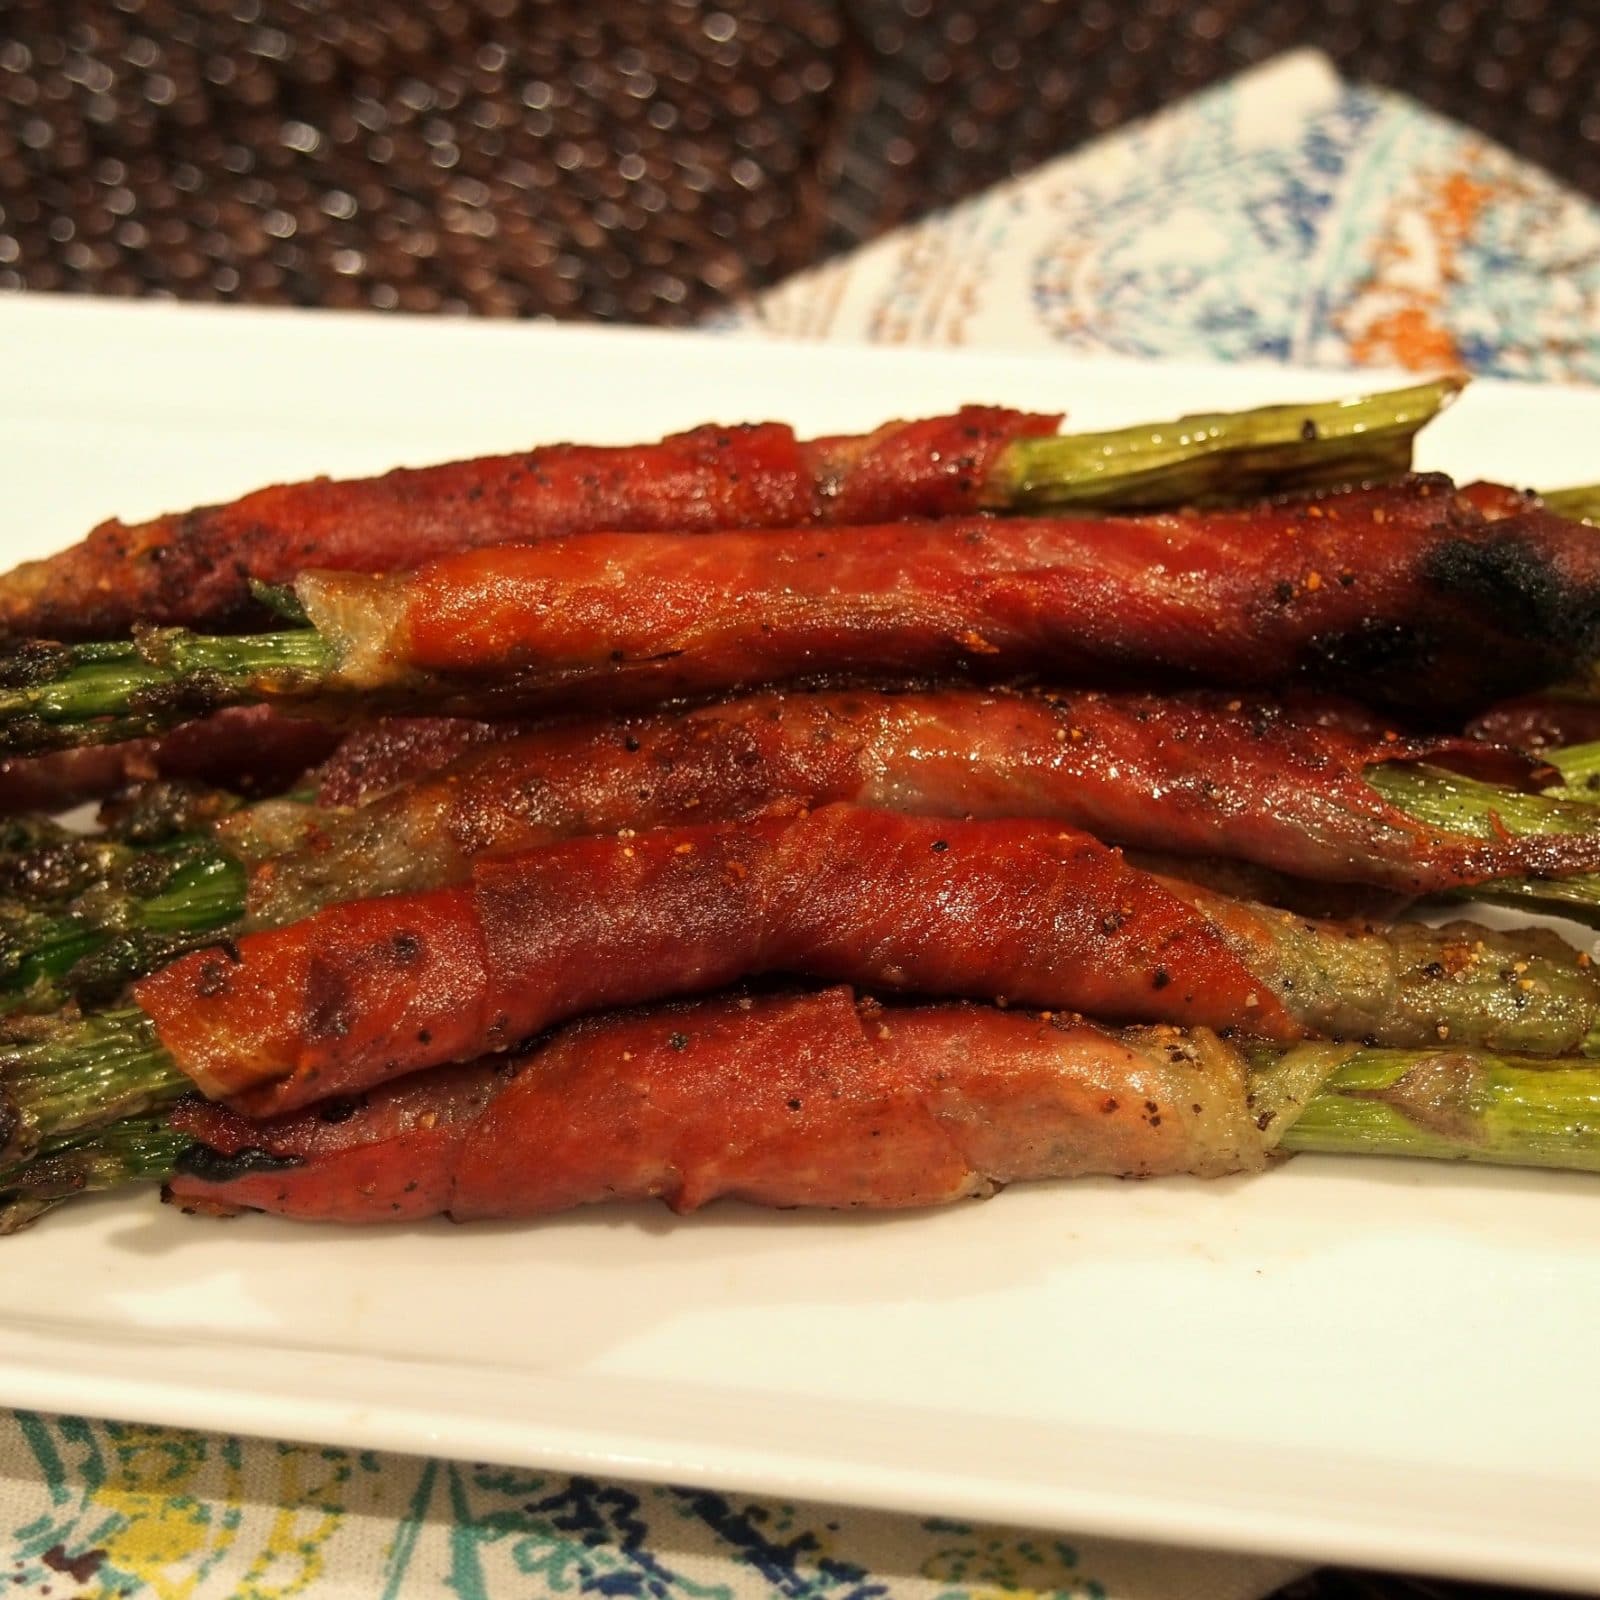 Grilled Asparagus with Prosciutto - simple & scrumptious. Fresh asparagus wrapped with prosciutto then grilled to perfection.